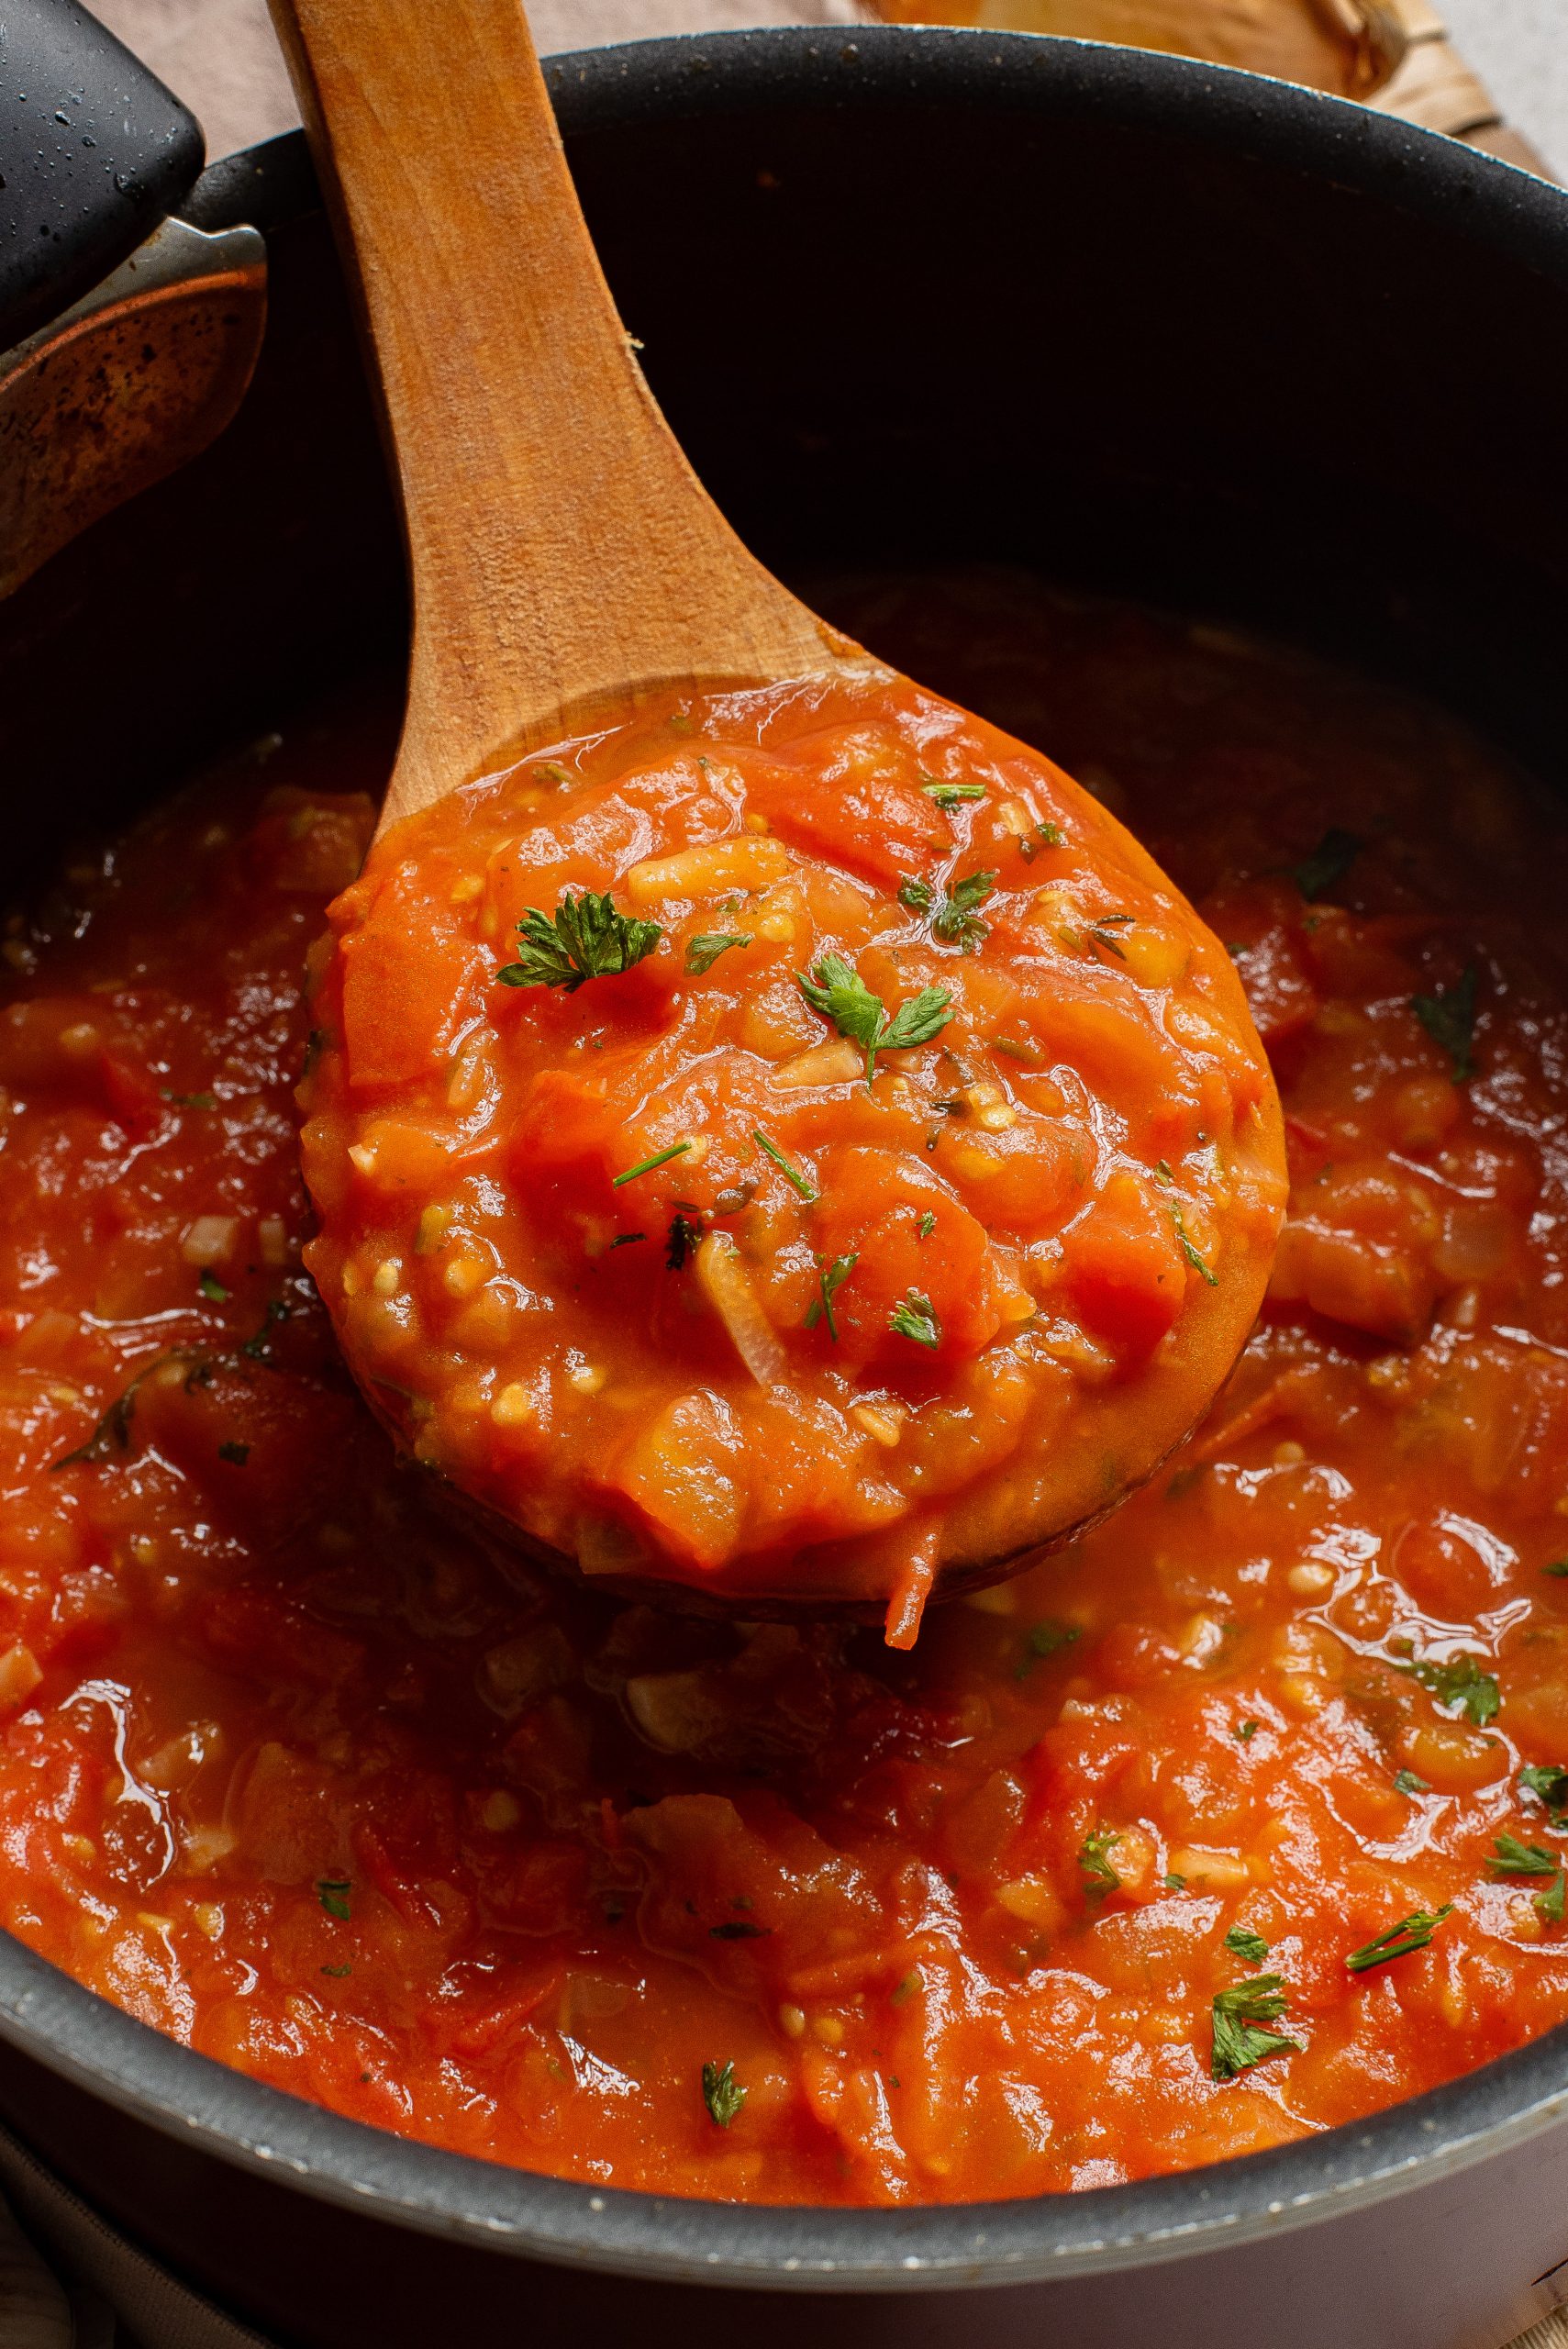 A wooden spoon scooping tomato sauce with vegetables from a pot.